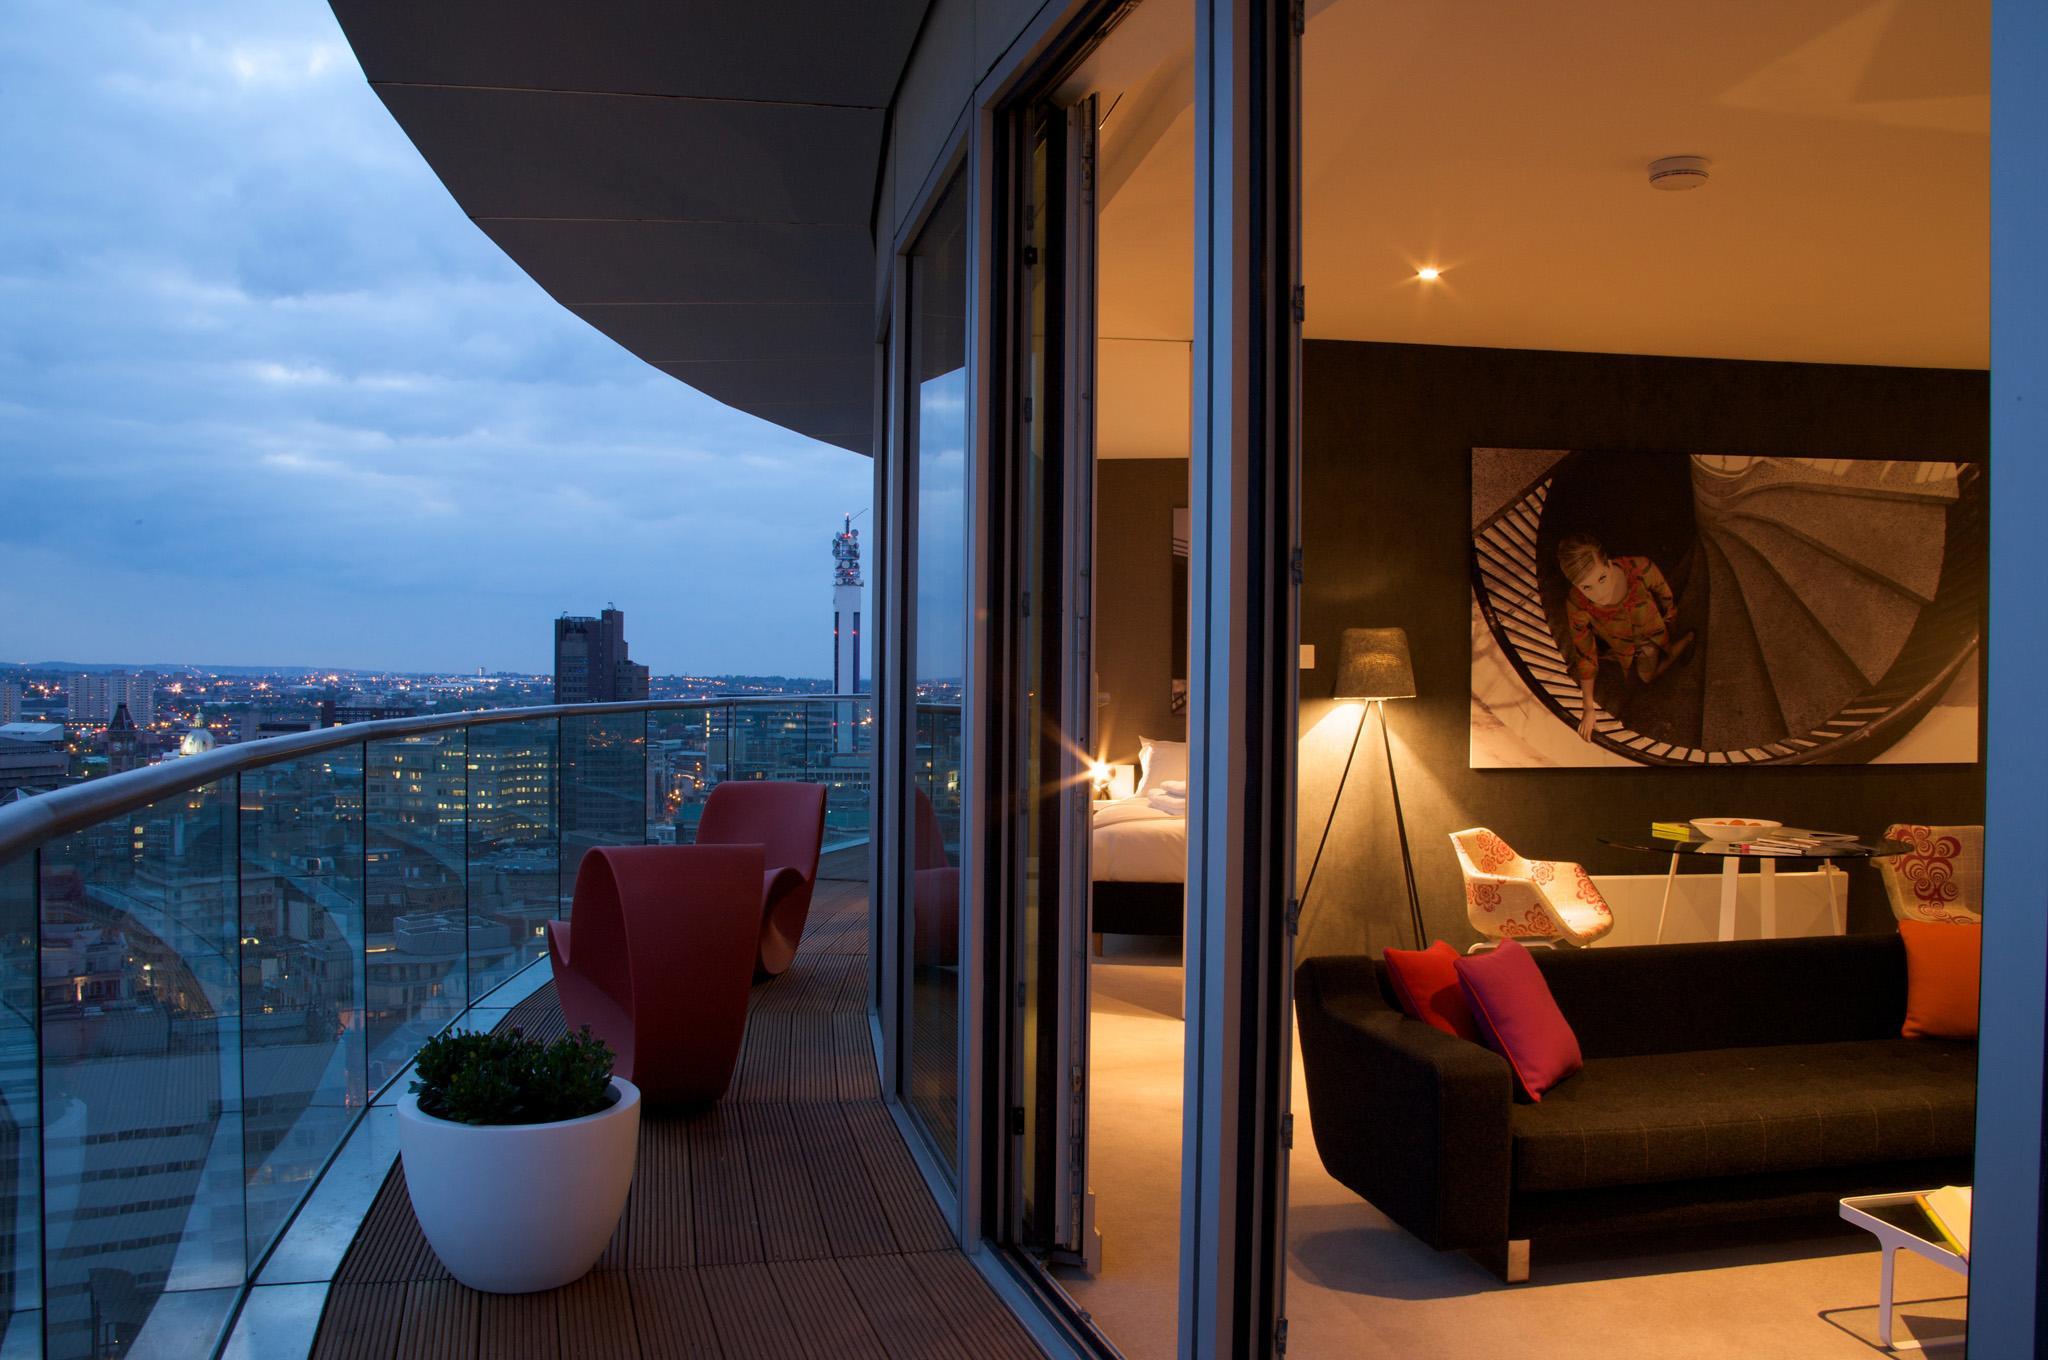 Staying Cool at the Rotunda offers stylish luxury and panoramic views of Birmingham